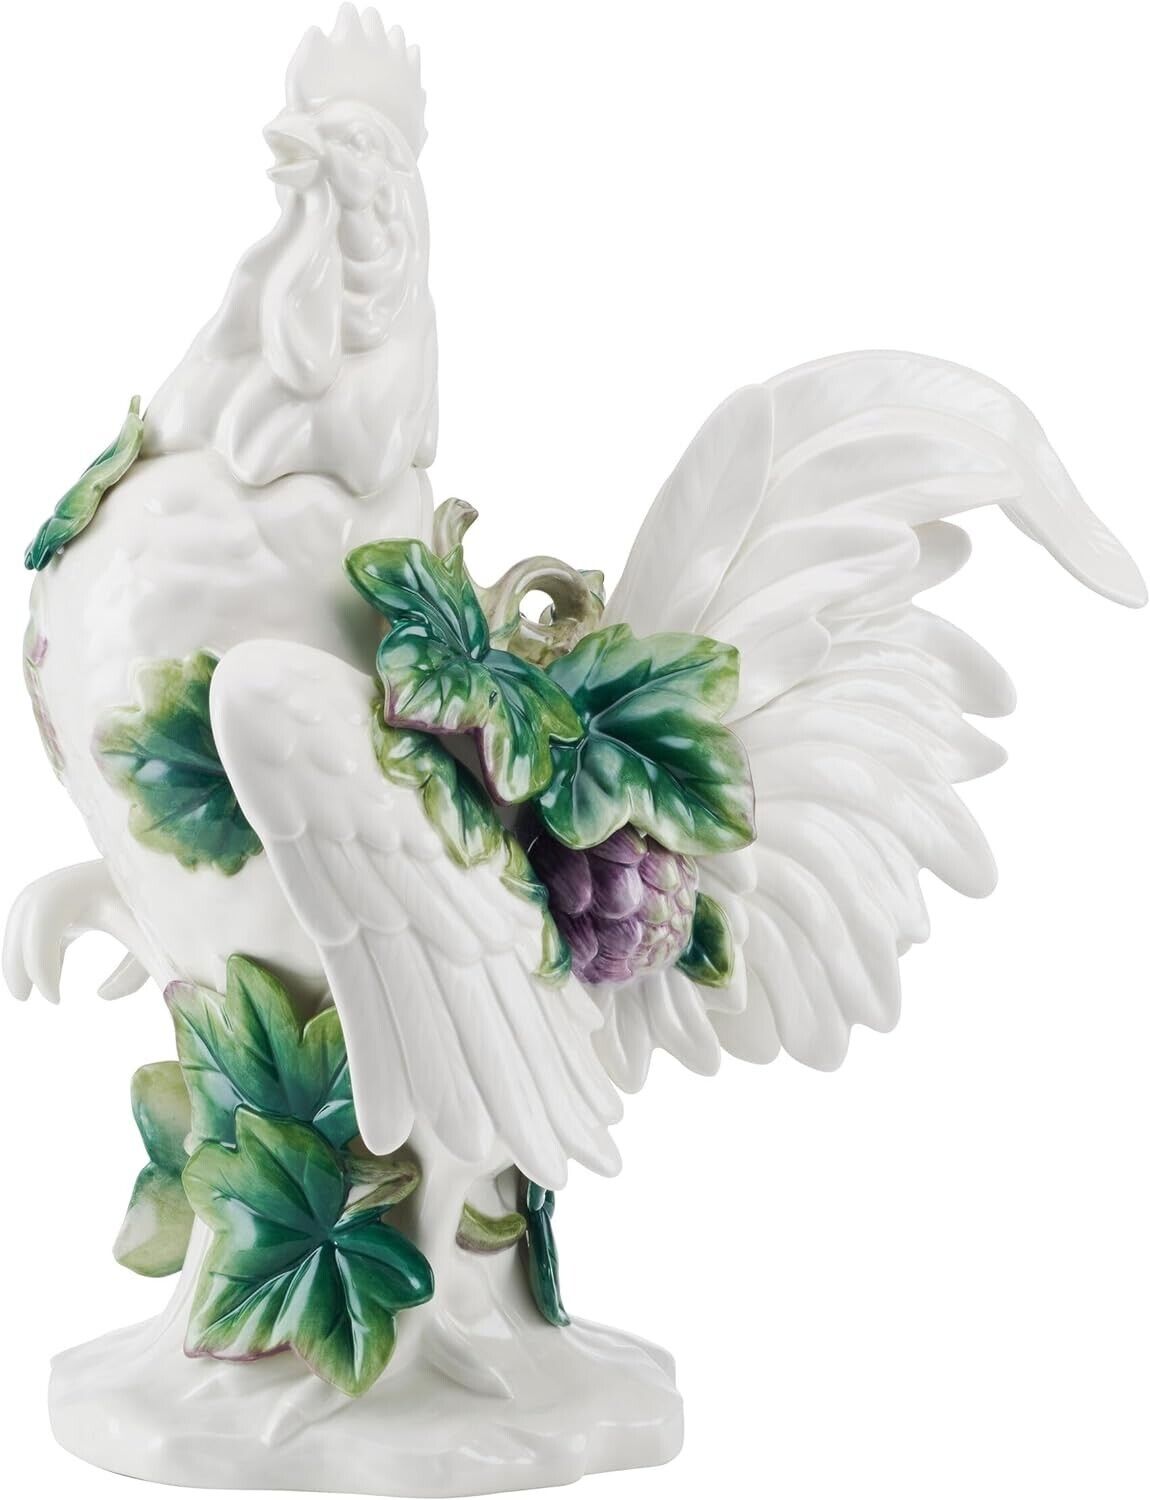 Fitz and Floyd Ceramic Rooster Figurine Sicily Green 19-Inch New In Box 5308970